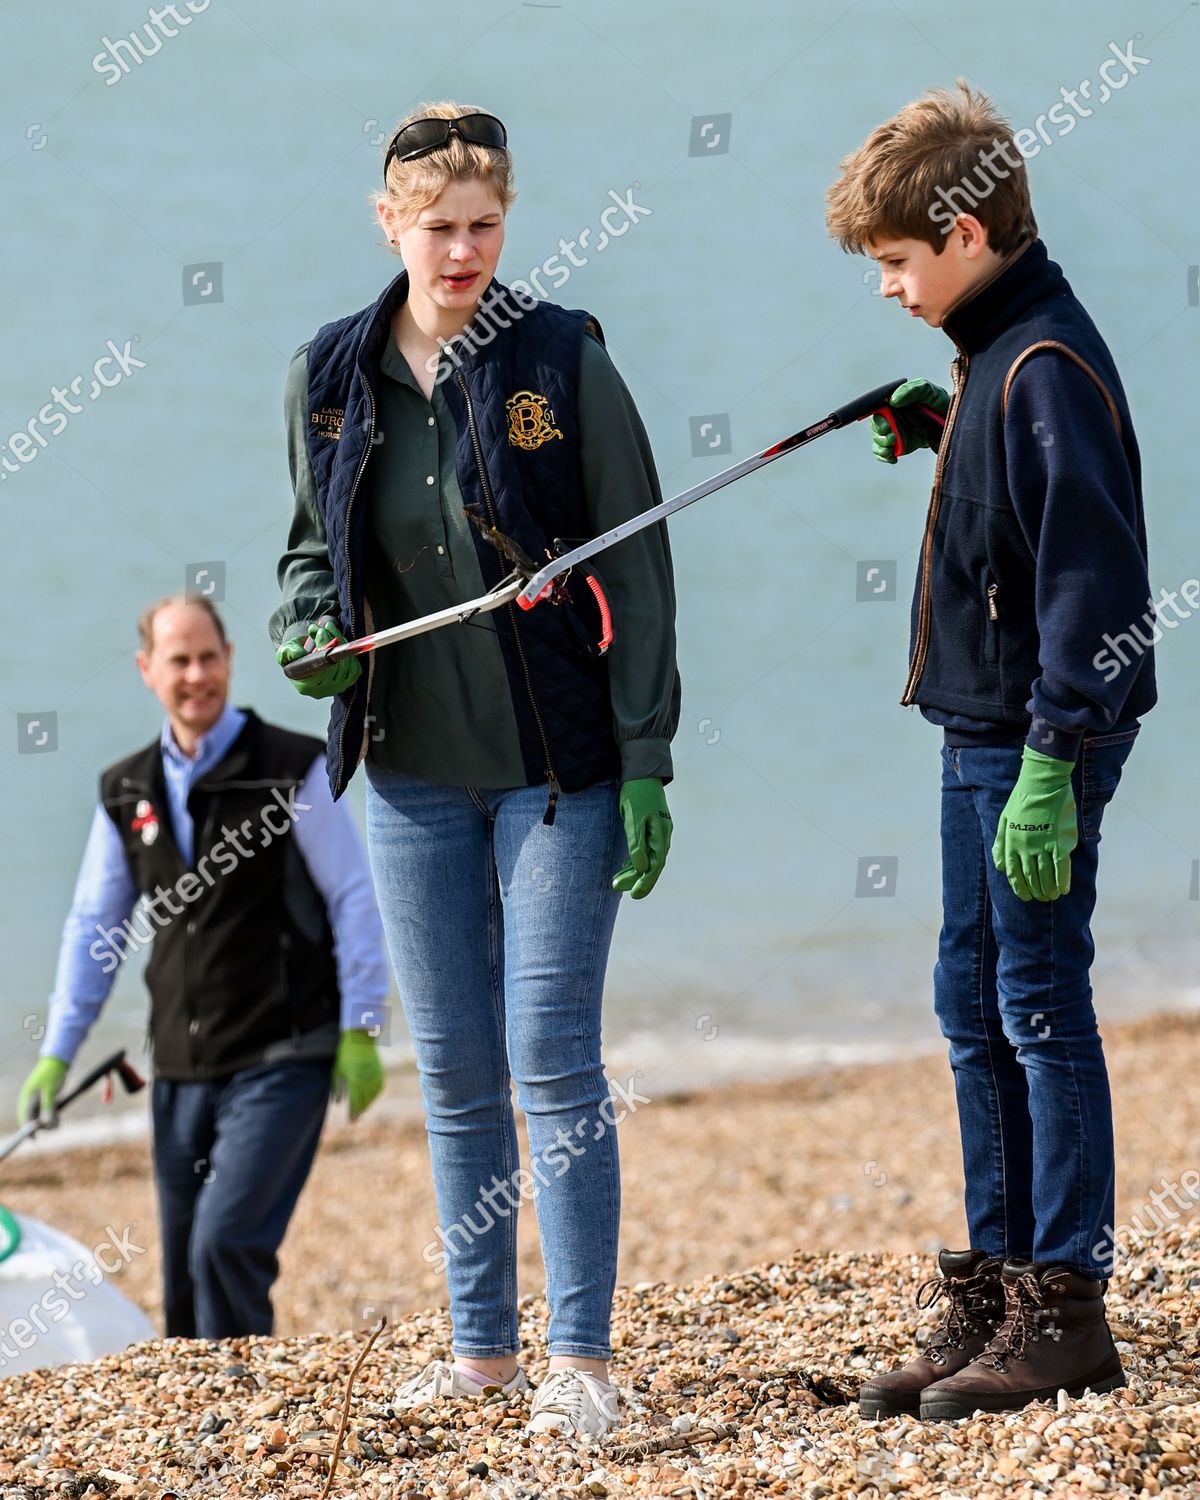 prince-edward-and-sophie-countess-of-wessex-great-british-beach-clean-southsea-beach-portsmouth-uk-shutterstock-editorial-10782998bg.jpg